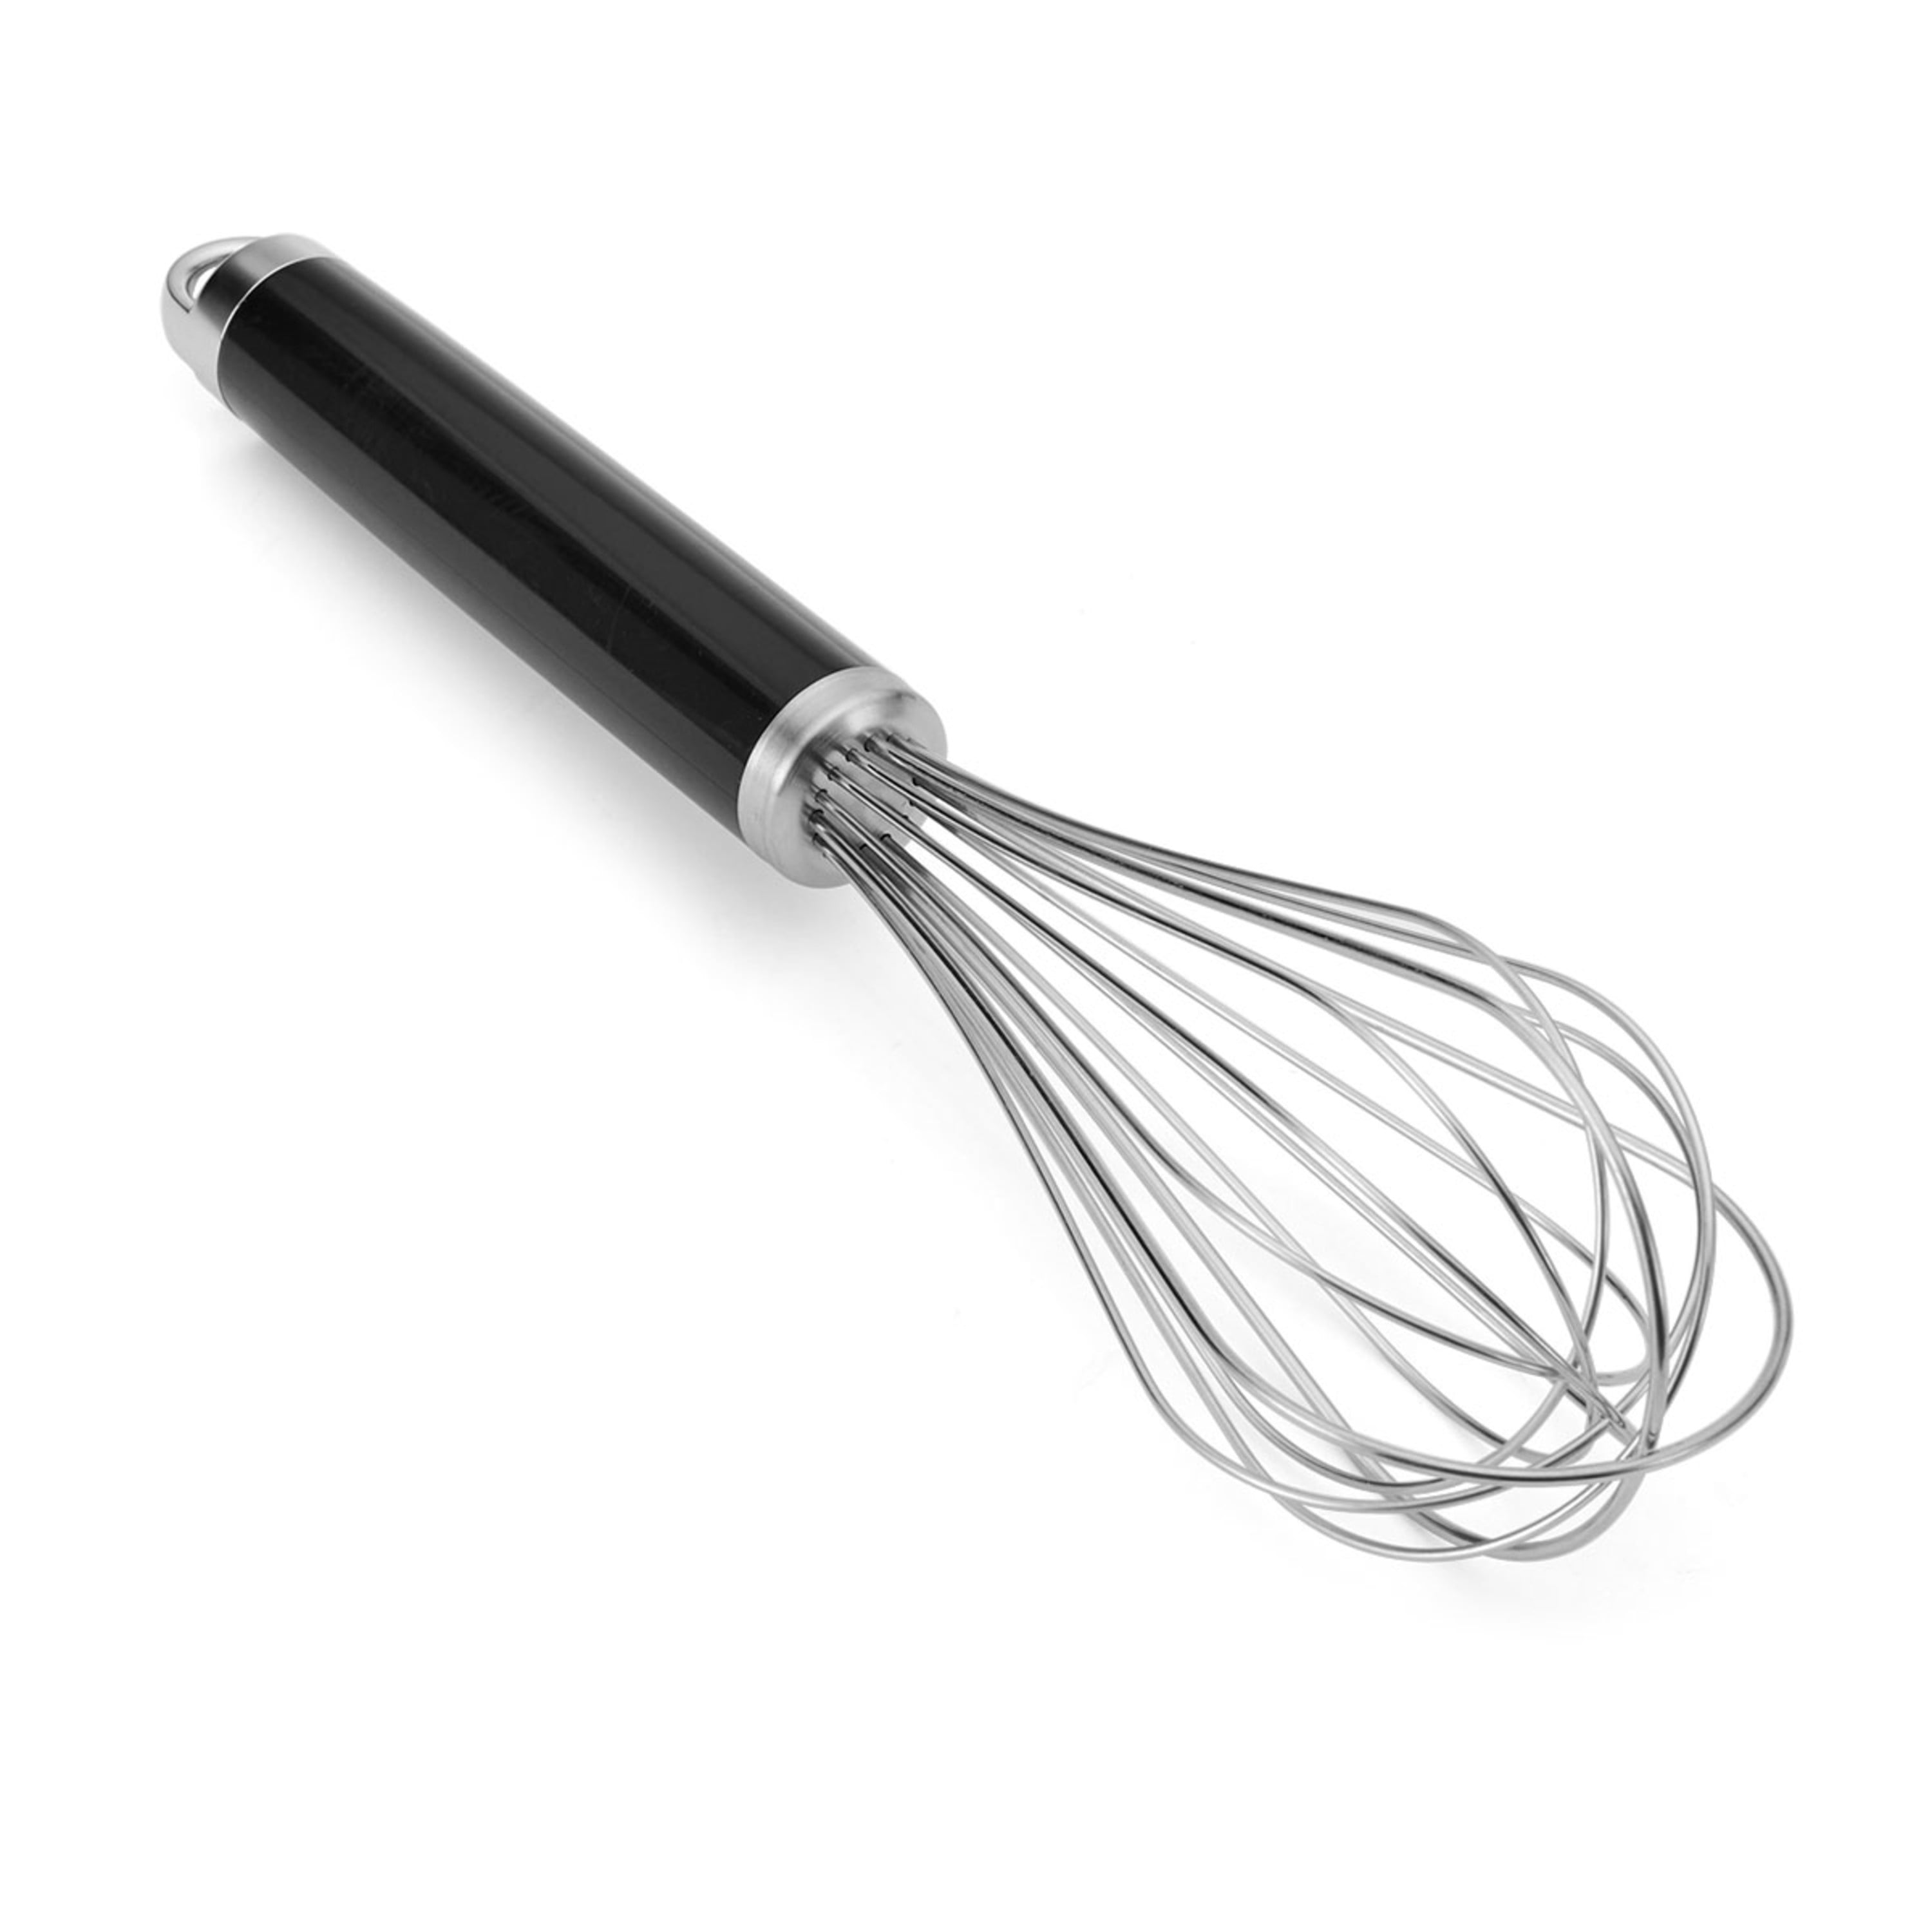 Whisk Wiper - Wipe A Whisk Easily - Multipurpose Kitchen Tool, Made in USA - Includes 11 inch Stainless-Steel Whisk (Color: Violet), Purple